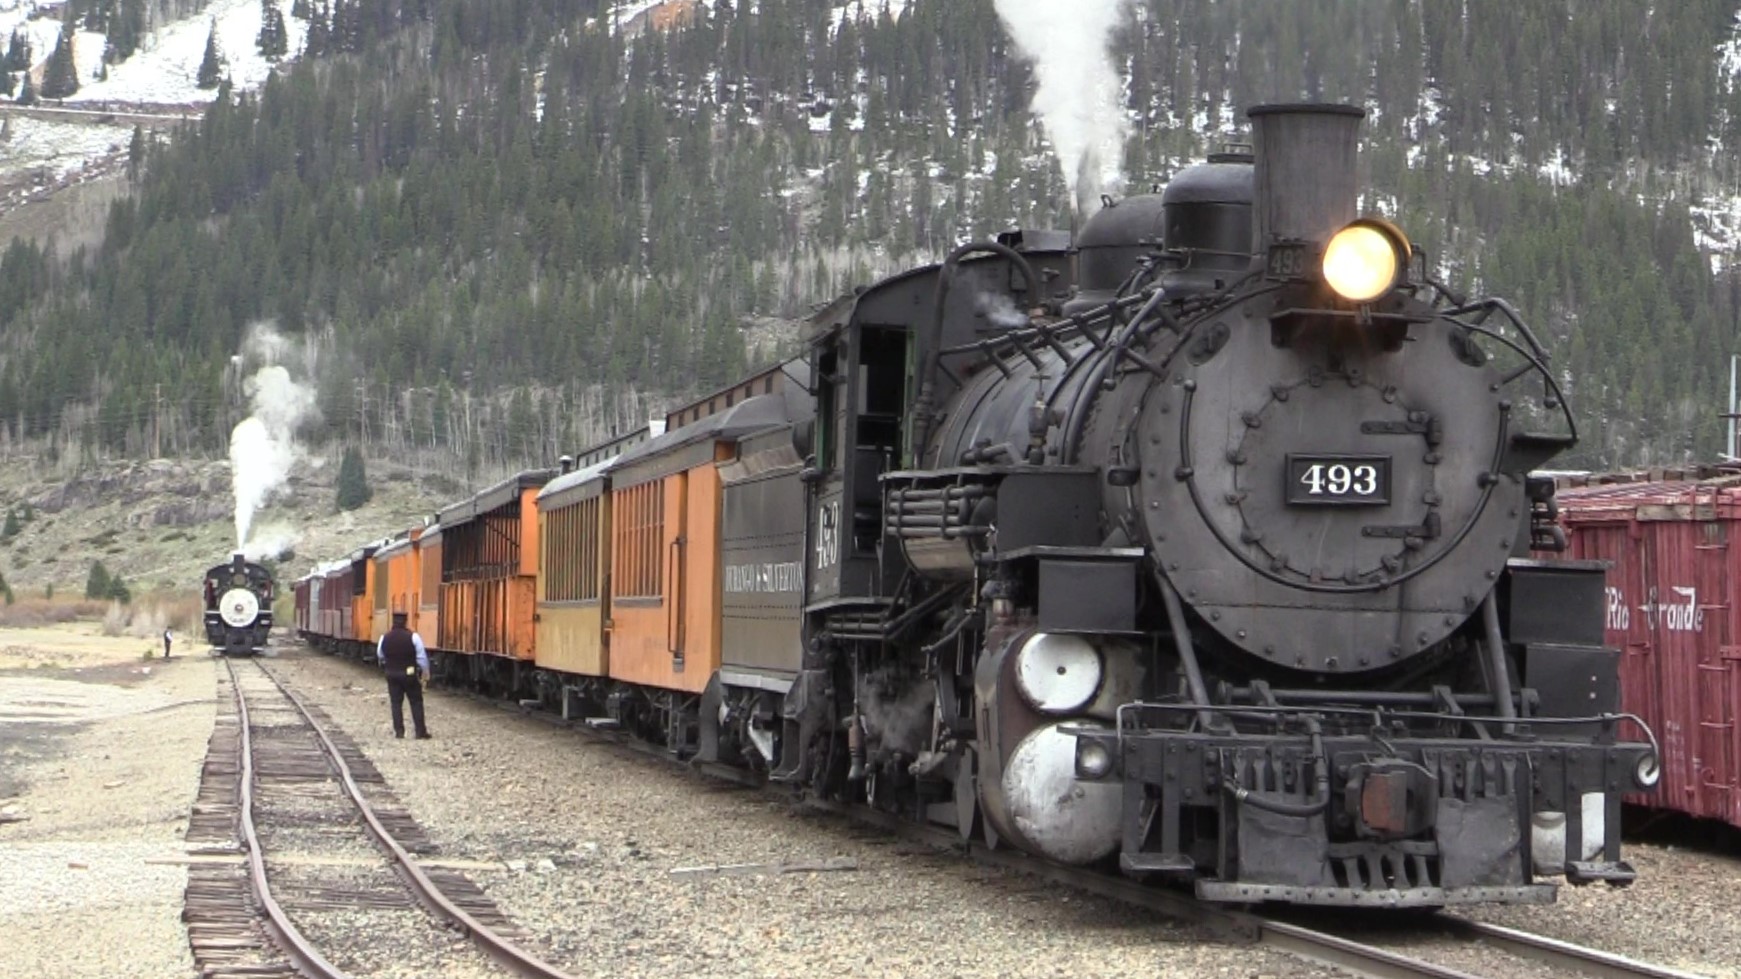 re-18-and-493-pulling-a-15-car-train-into-a-dark-silverton-today